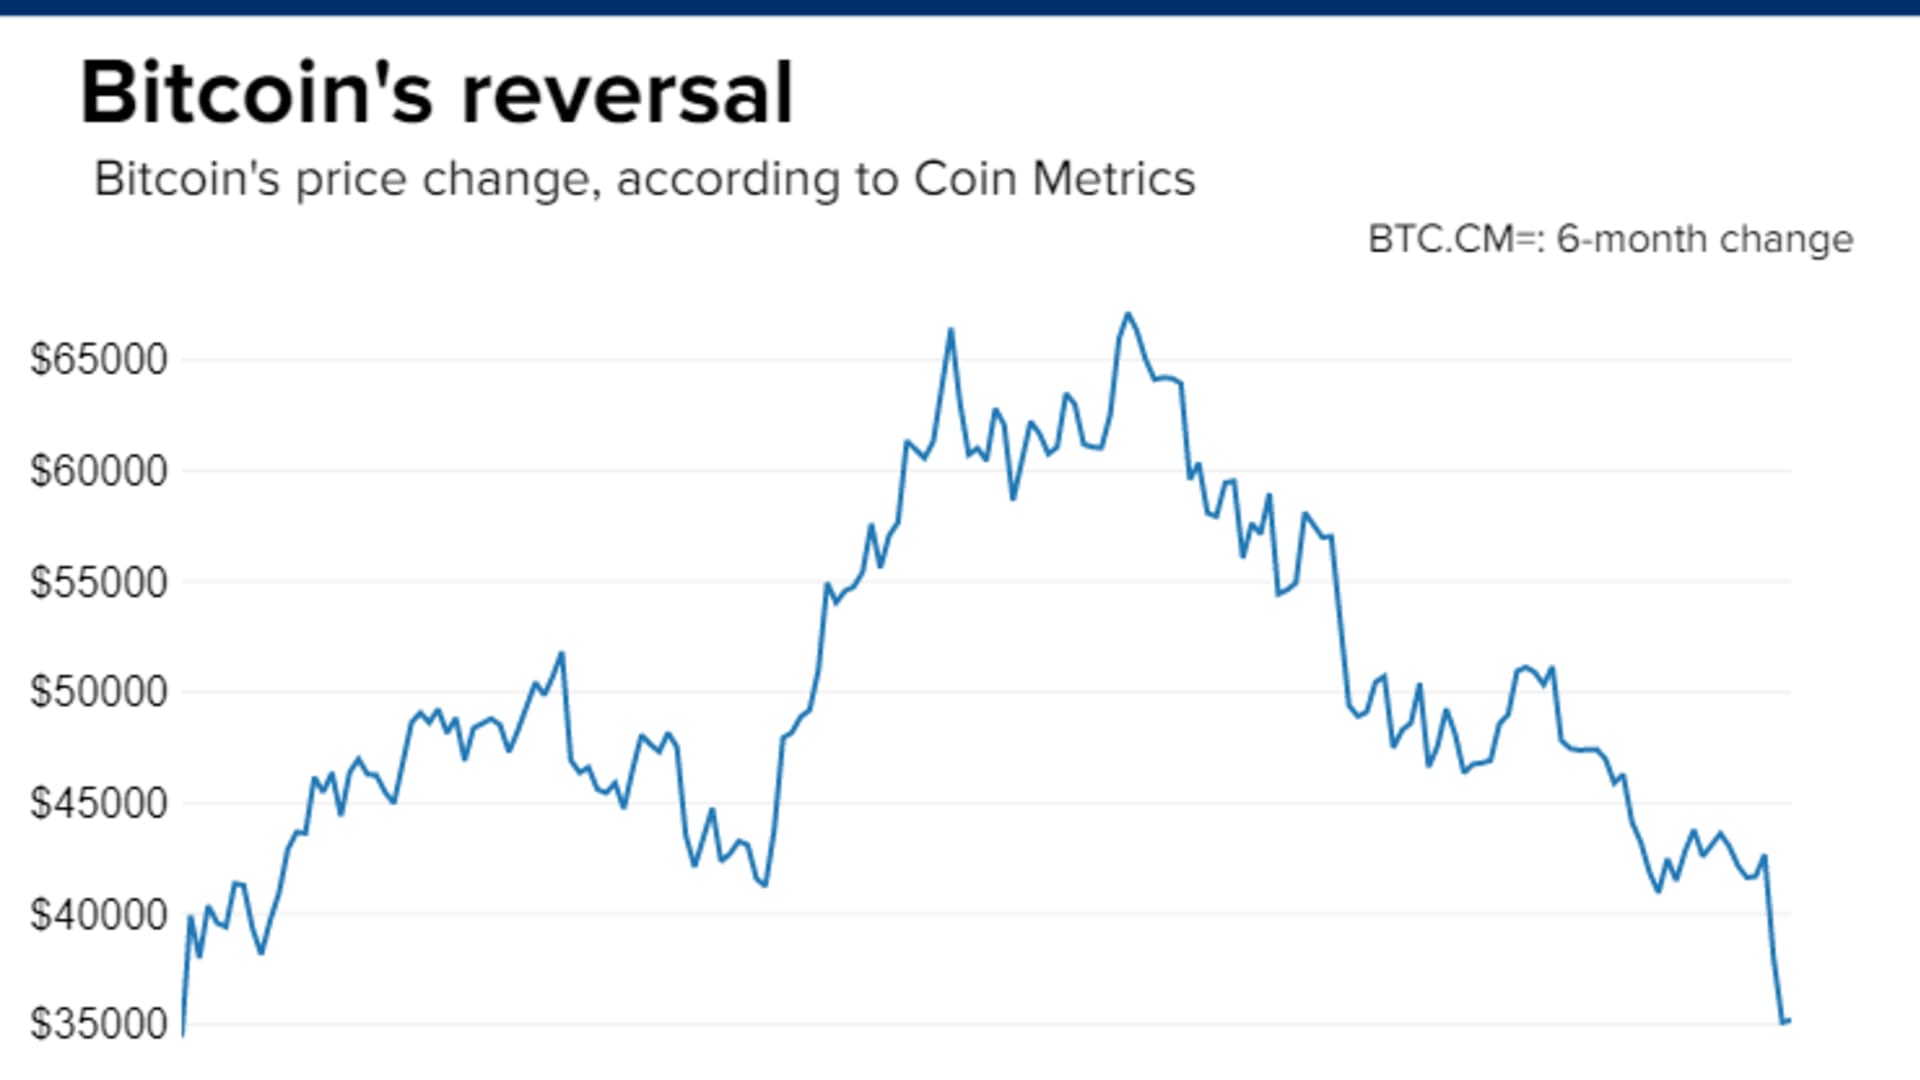 Bitcoin has lost roughly 50% since its all-time high in November.